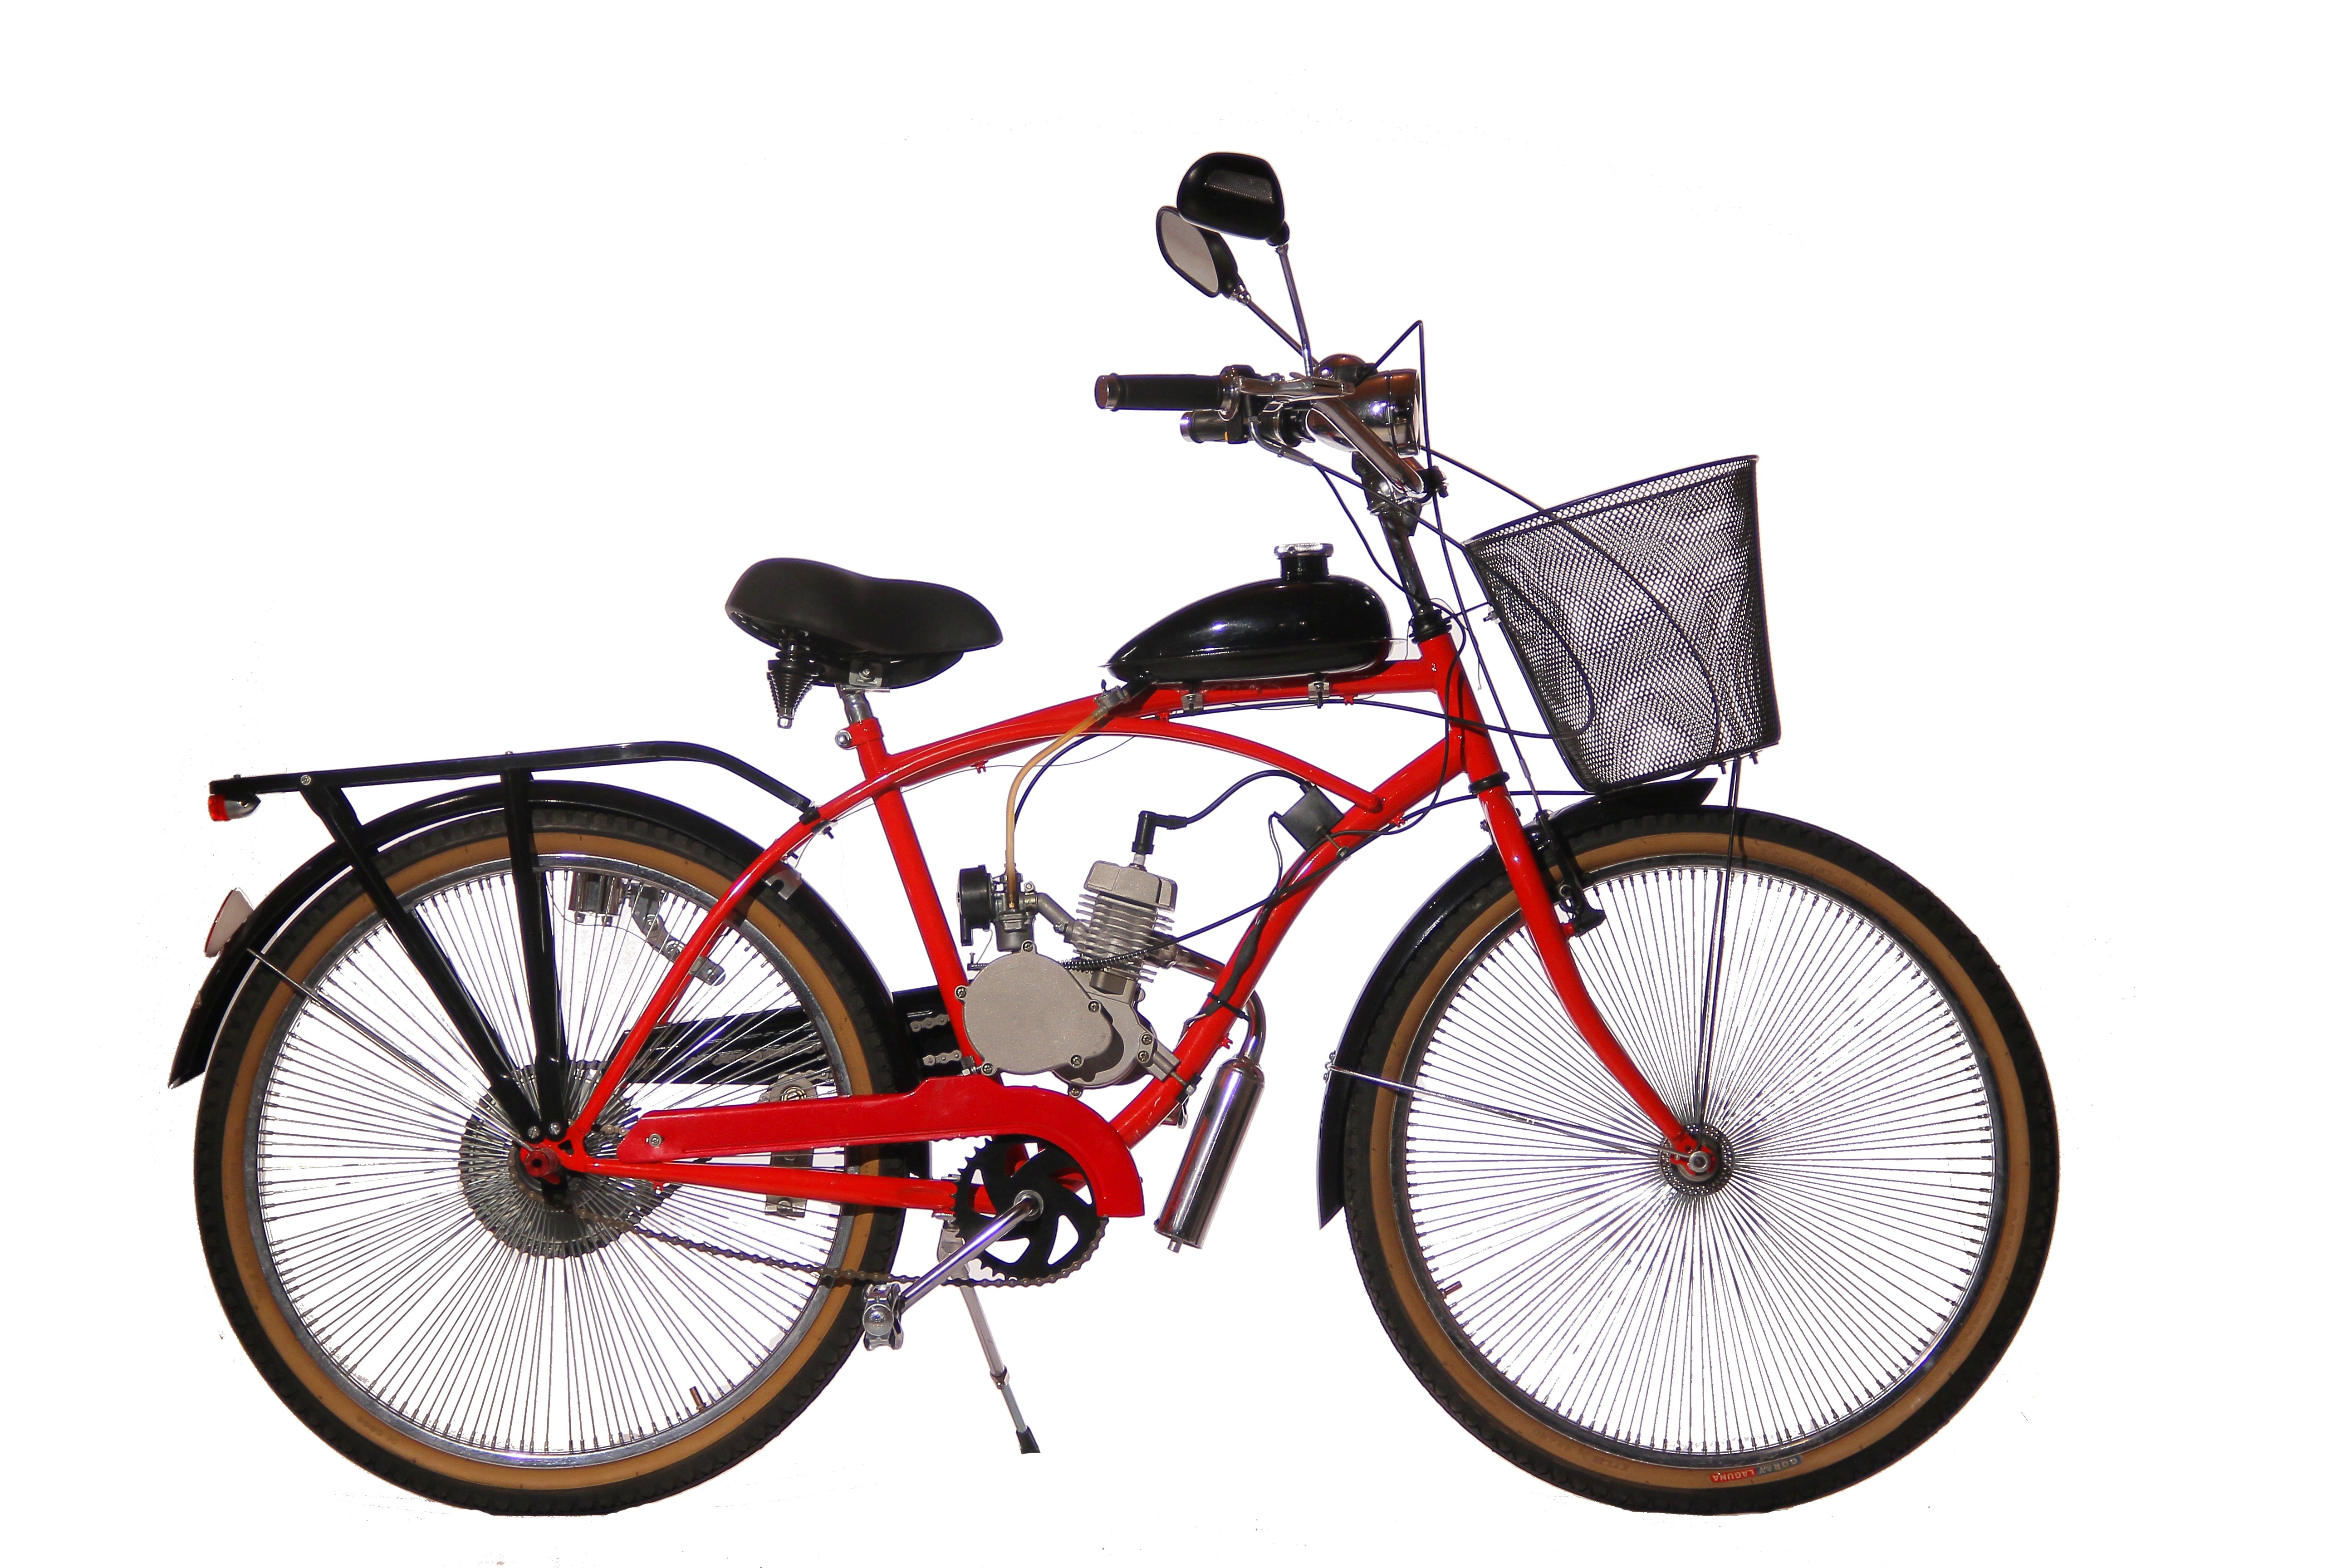 Motorized, Bicycle, Red, bicycle, transportation